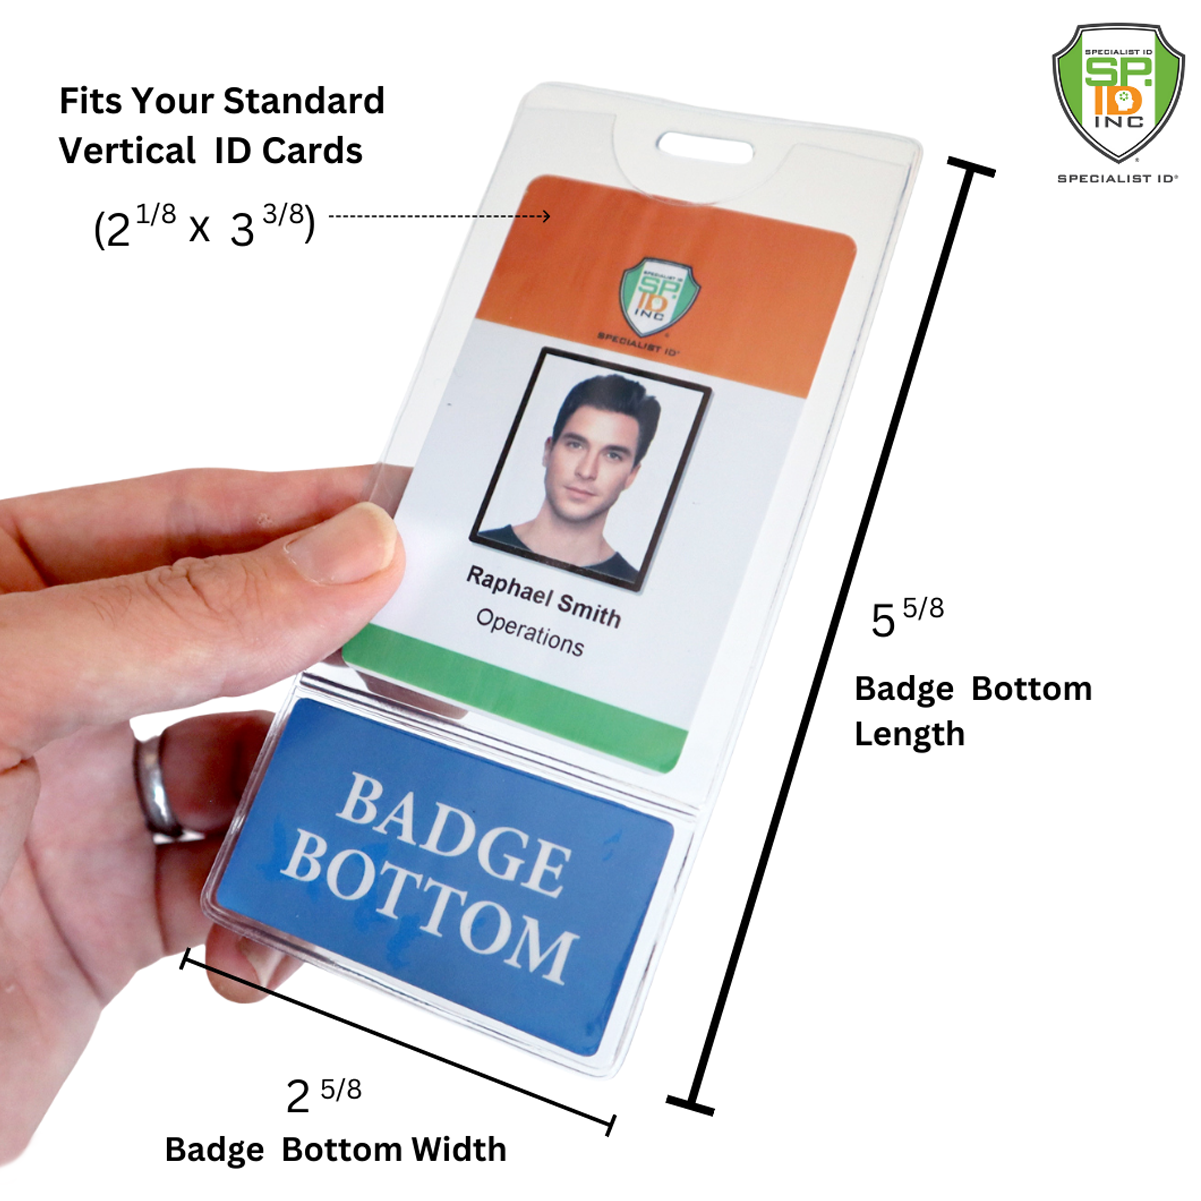 Badge Bottom Sleeve - Top portion holds standard vertical ID card - Bottom portion comes with title name tag  - 2 in 1 combo vertical